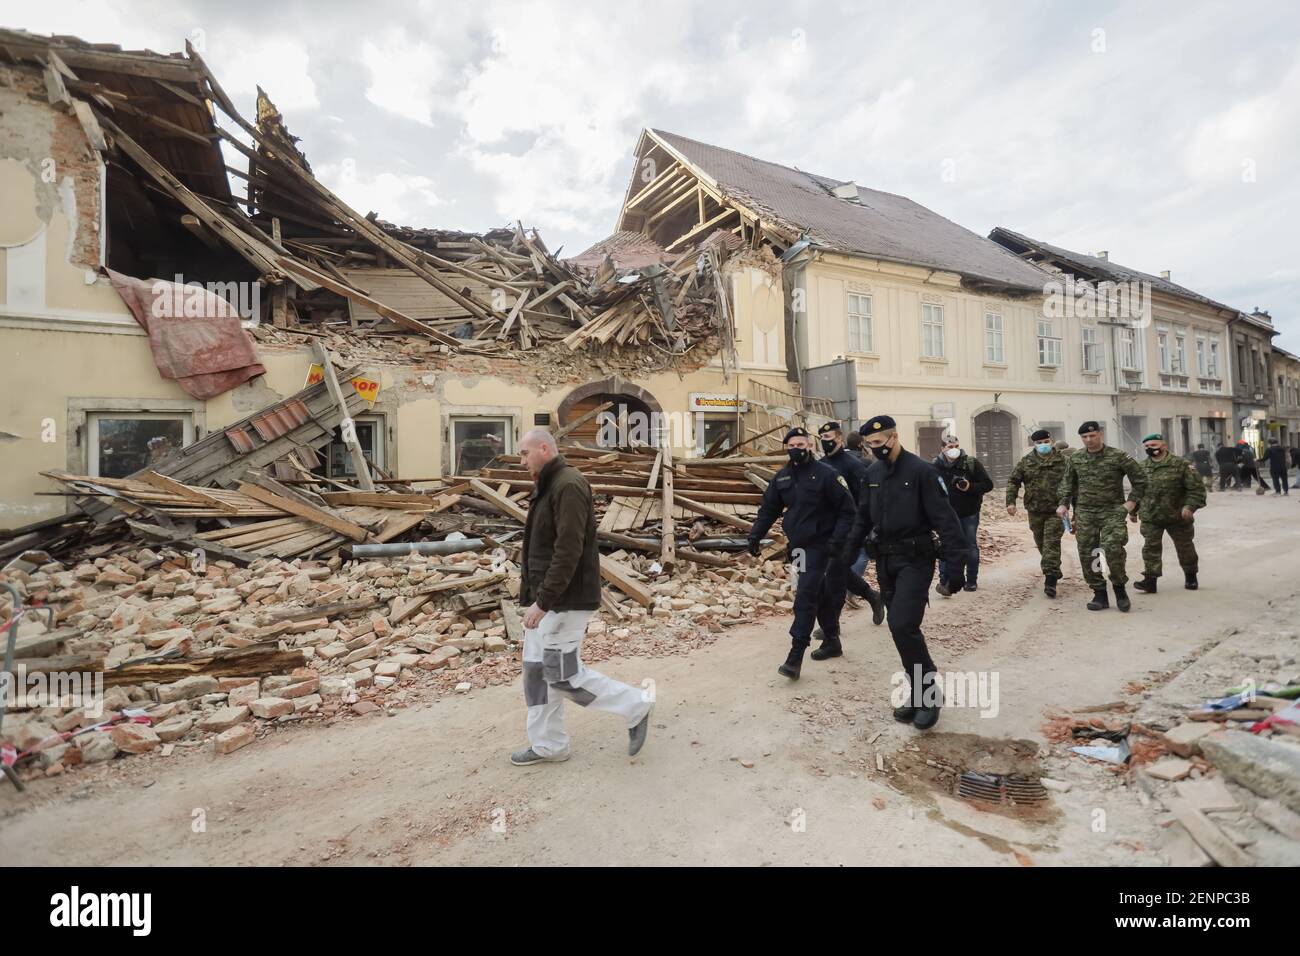 A catastrophic earthquake measuring 6.3 hit Petrinja and was felt in most of the country. So far 7 people died during earthquake. In the photo: Police Stock Photo